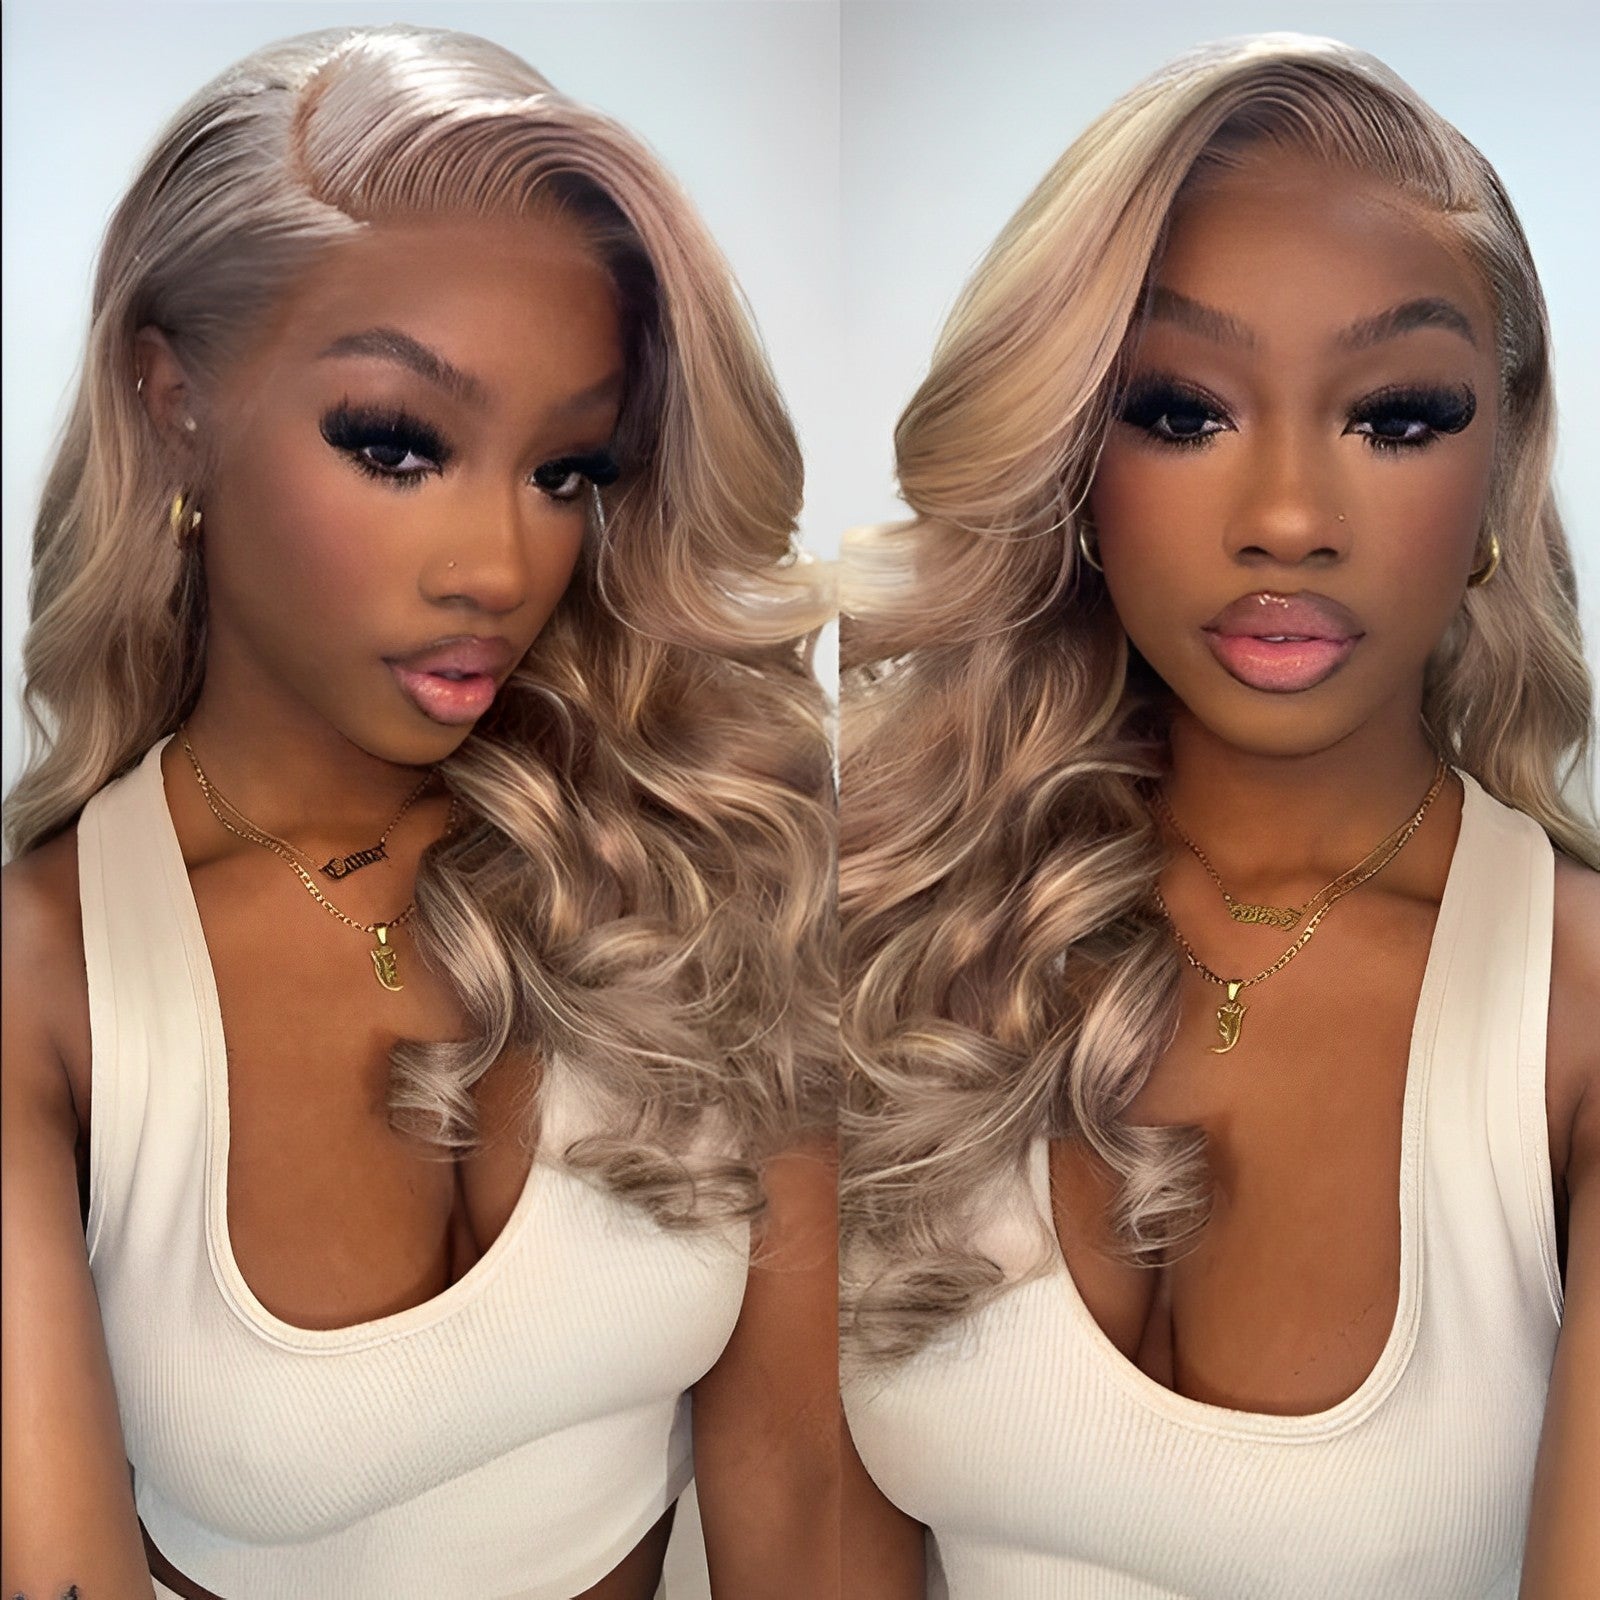 Gluna Hair Exclusive Original Blonde Highlight 18/613 Clored Lace Front Human Hair Wigs